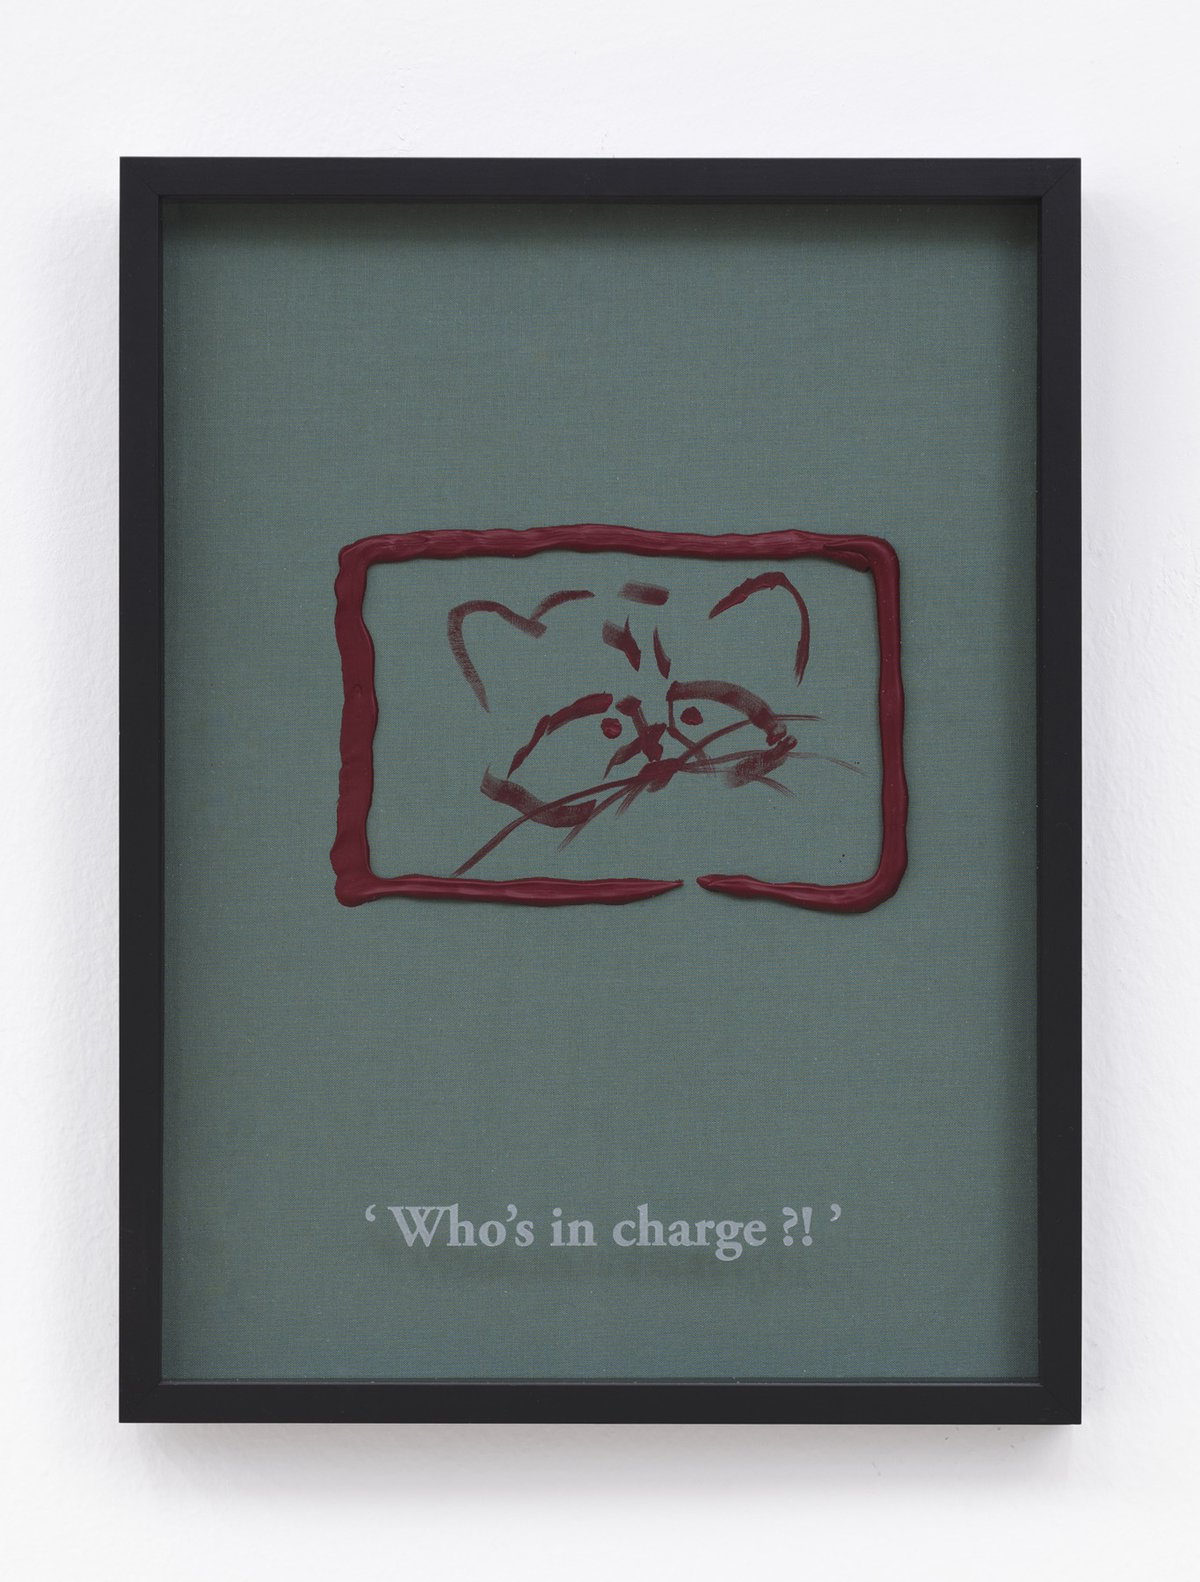 Philipp Timischl&quot;Who&#x27;s in charge?!&quot; (Green/Carmine), 2017Acrylic on linen and glass-engraved object frame40.1 x 32.1 cm